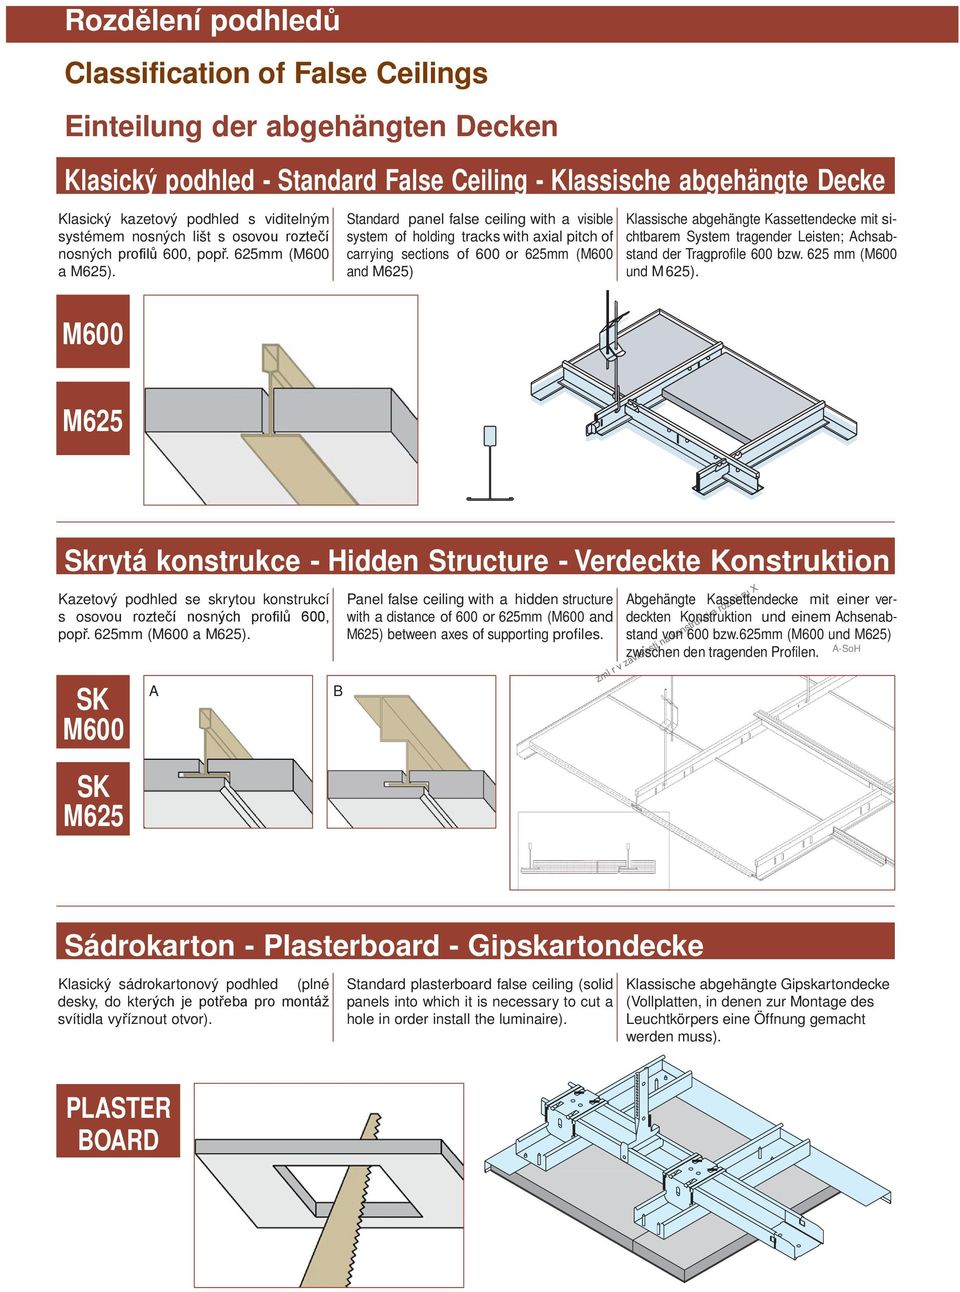 Standard panel false ceiling with a visible system of holding tracks with axial pitch of carrying sections of 600 or 625mm (M600 and M625) Klassische abgehängte Kassettendecke mit sichtbarem System